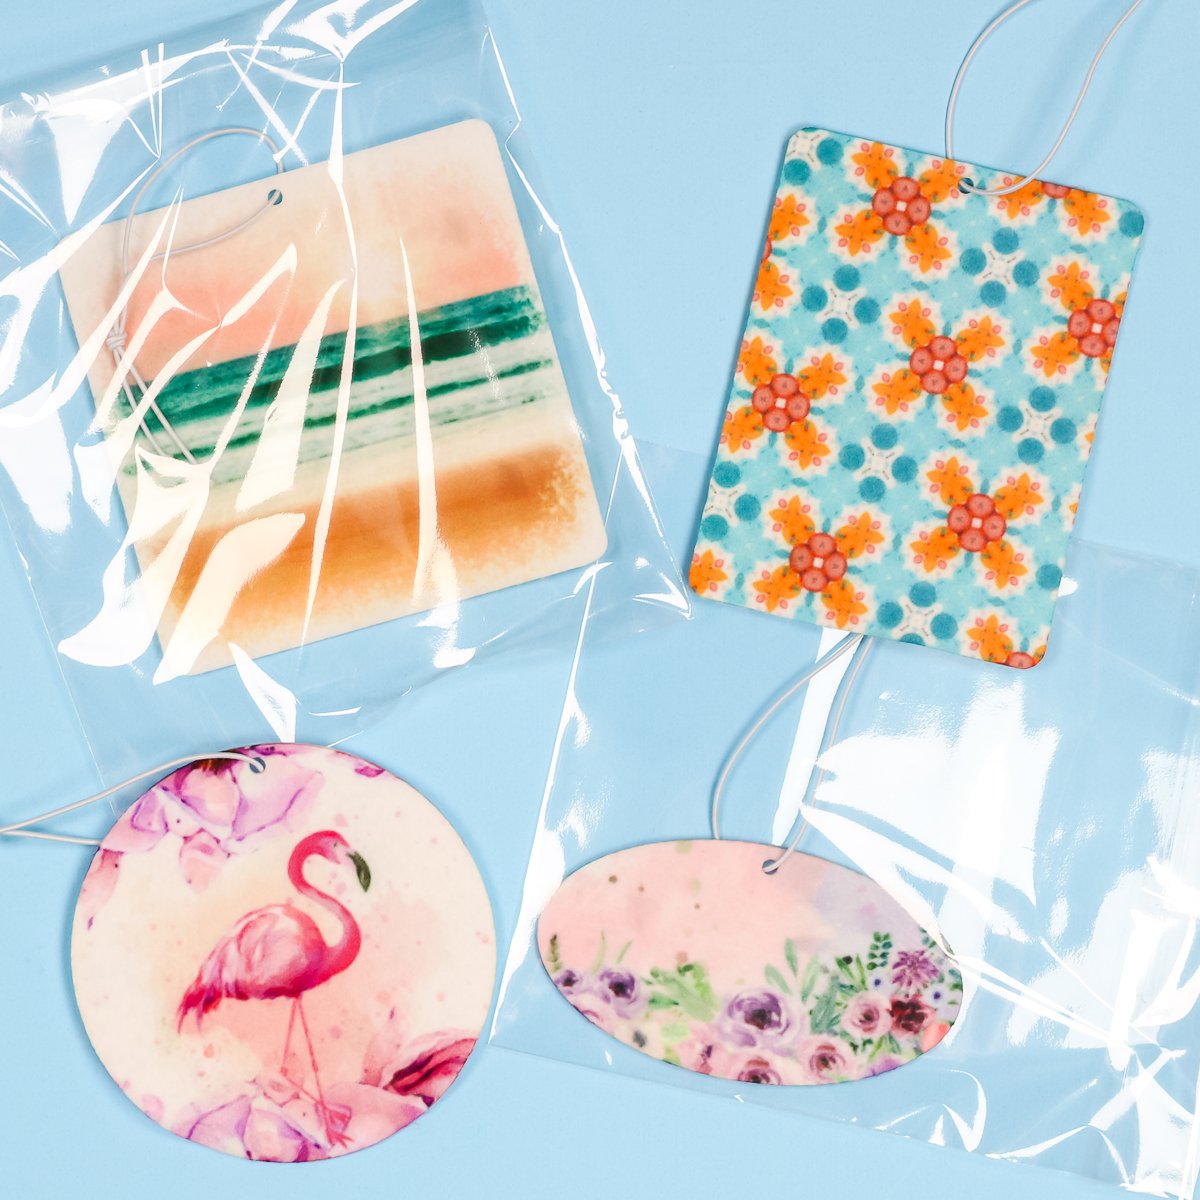 Complete and packaged sublimation air fresheners.